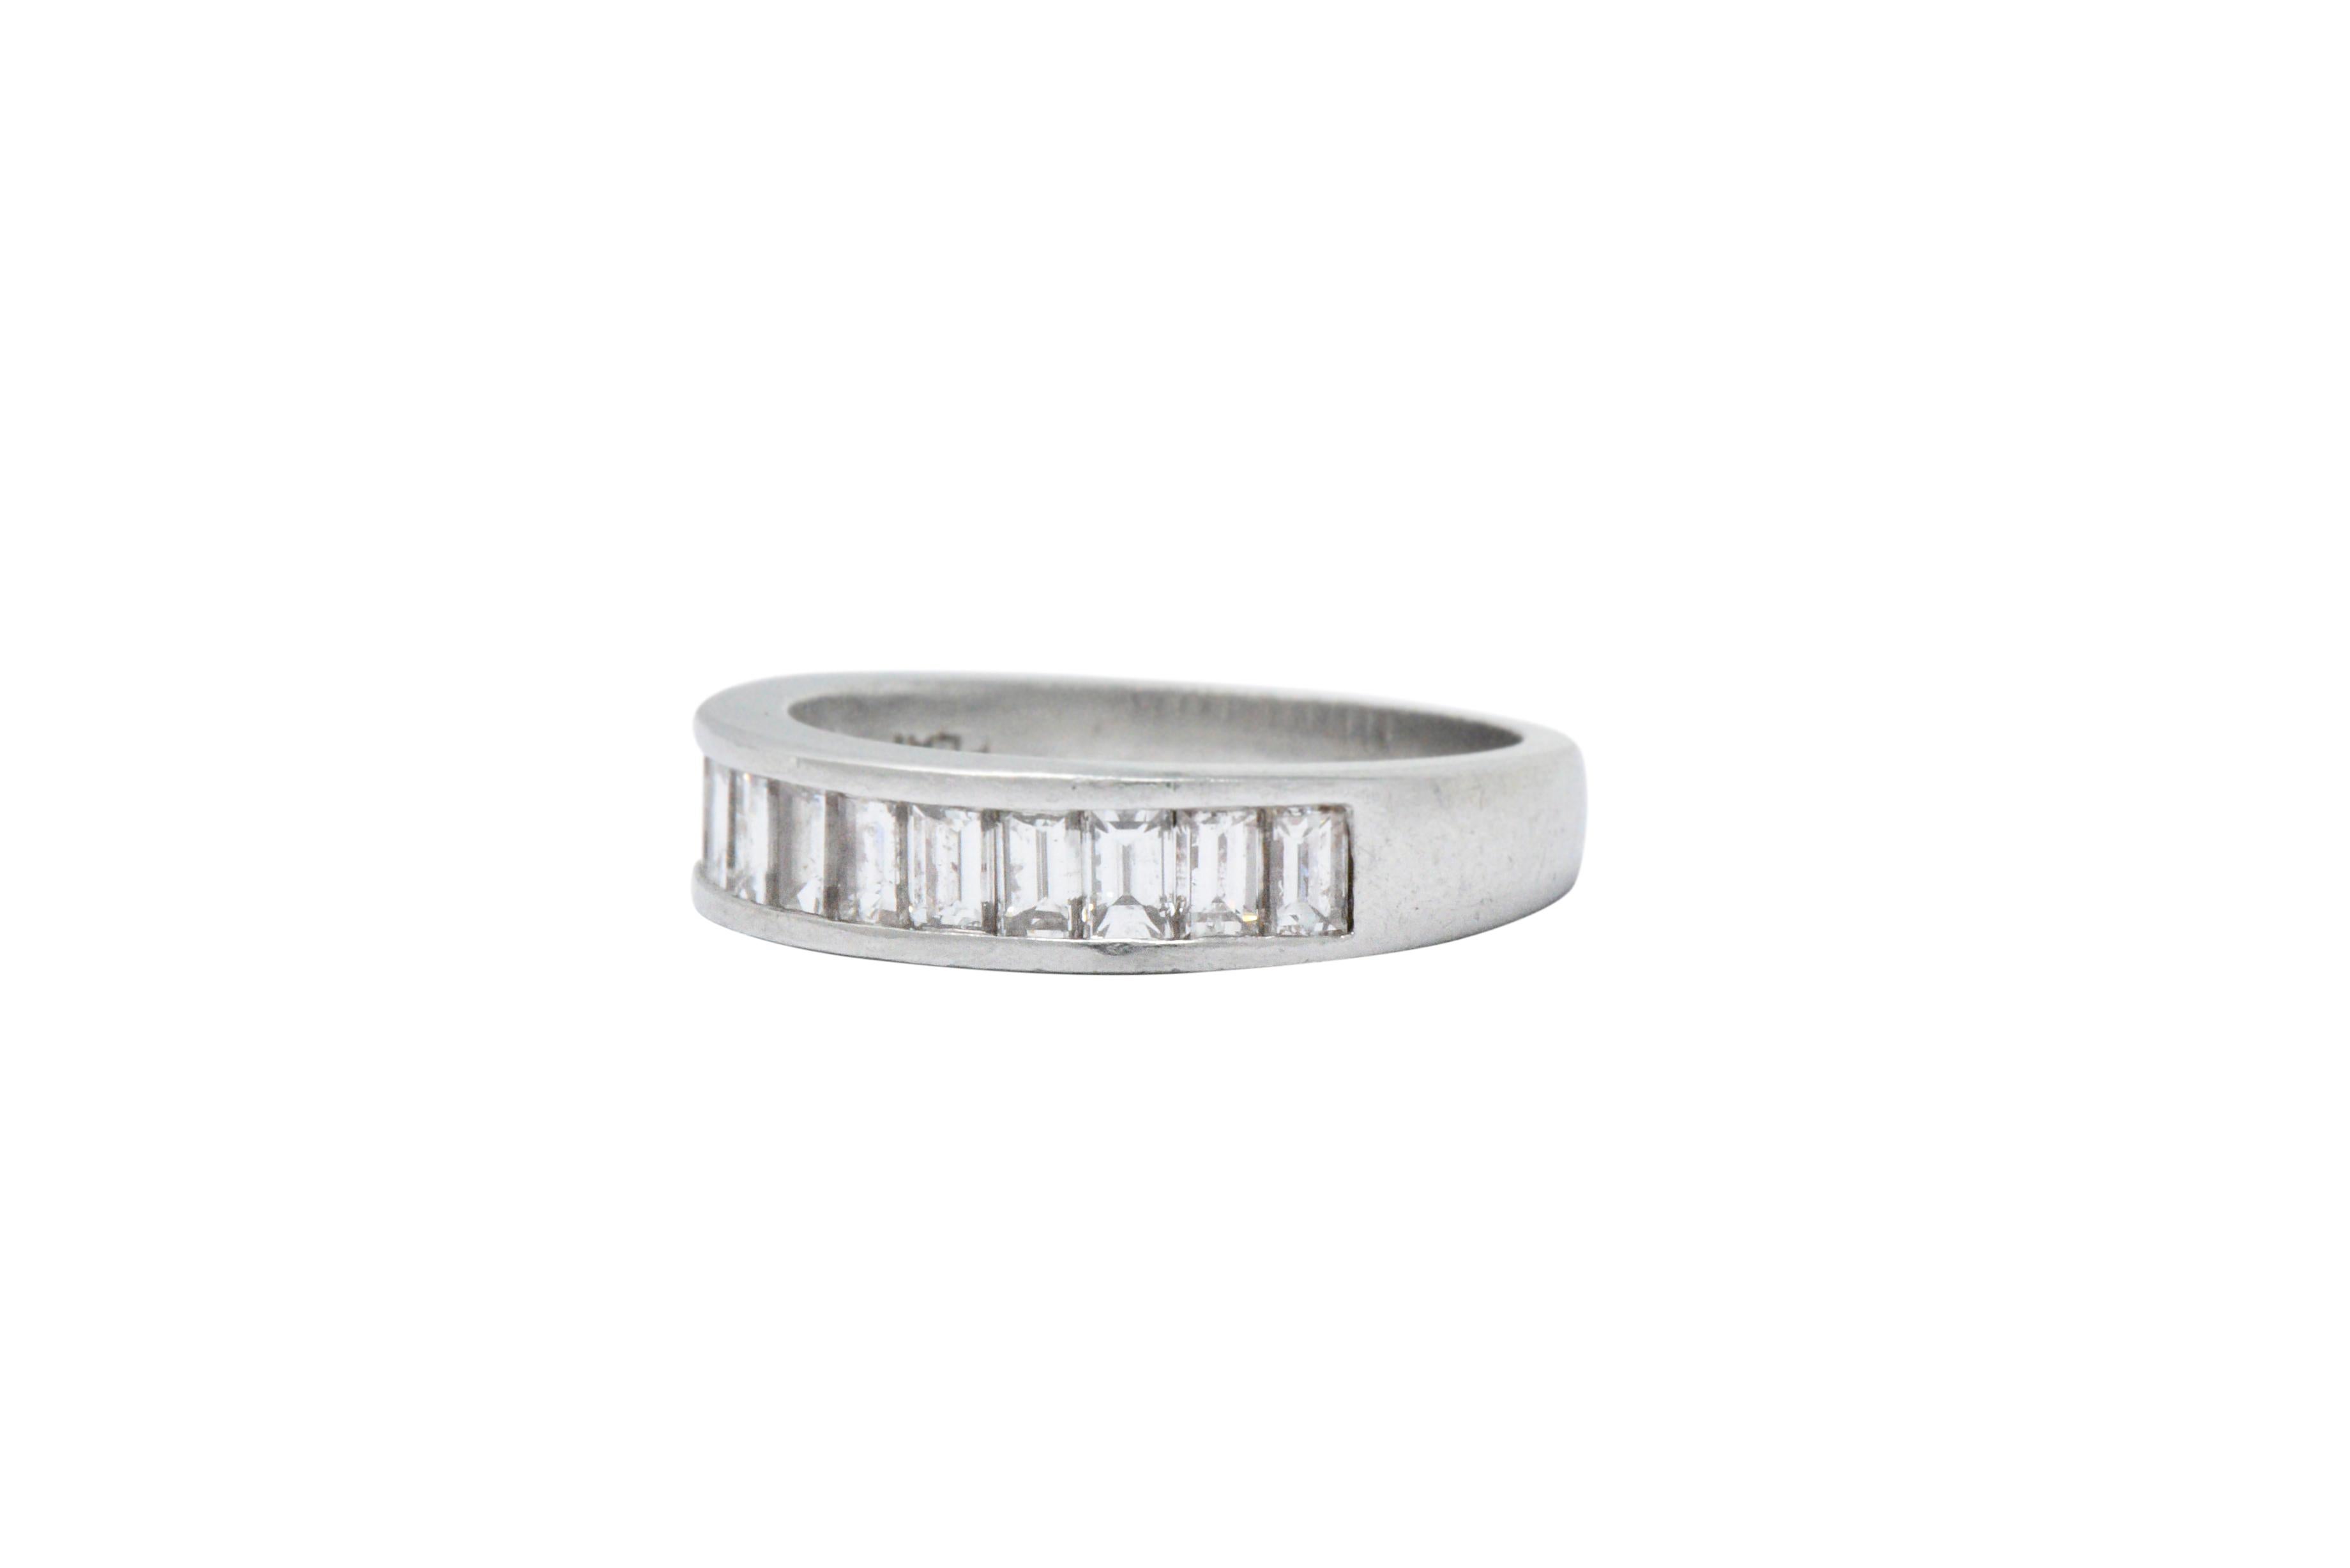 Set to the front with thirteen, channel set, straight baguette cut diamonds, approximately 1.10 carats total, GHI color and VS to SI clarity

The diamonds are well matched and the channel setting gives this ring a sleek refined look, also